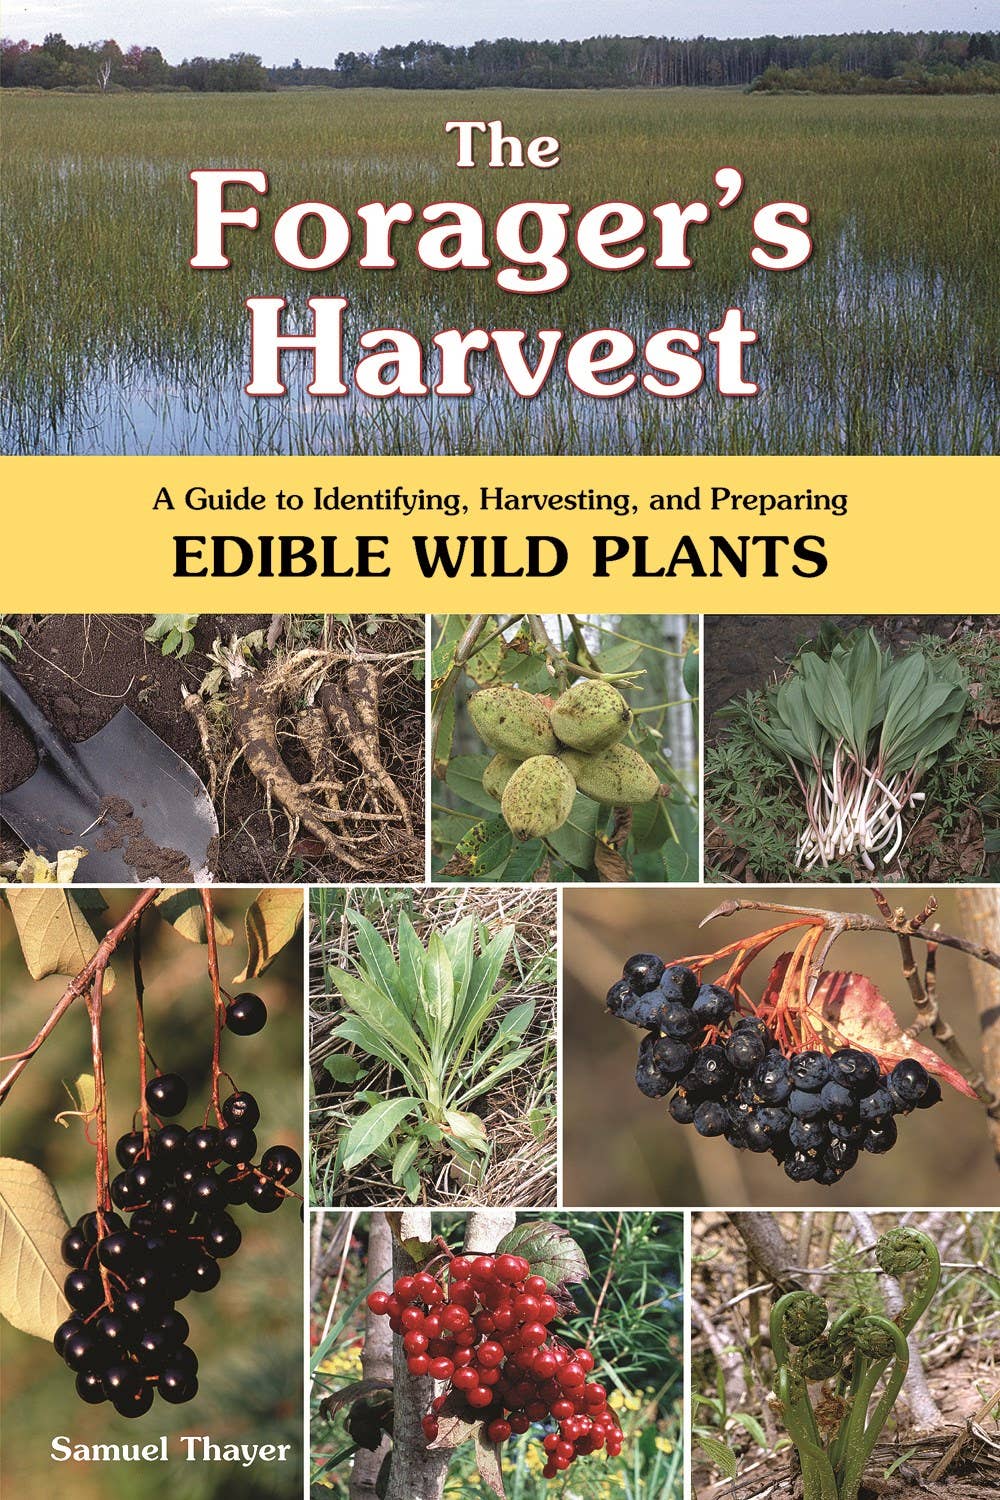 The Foragers Harvest: Guide to Identifying, Harvesting and Preparing Edible Wild Plans - Samuel Thayer